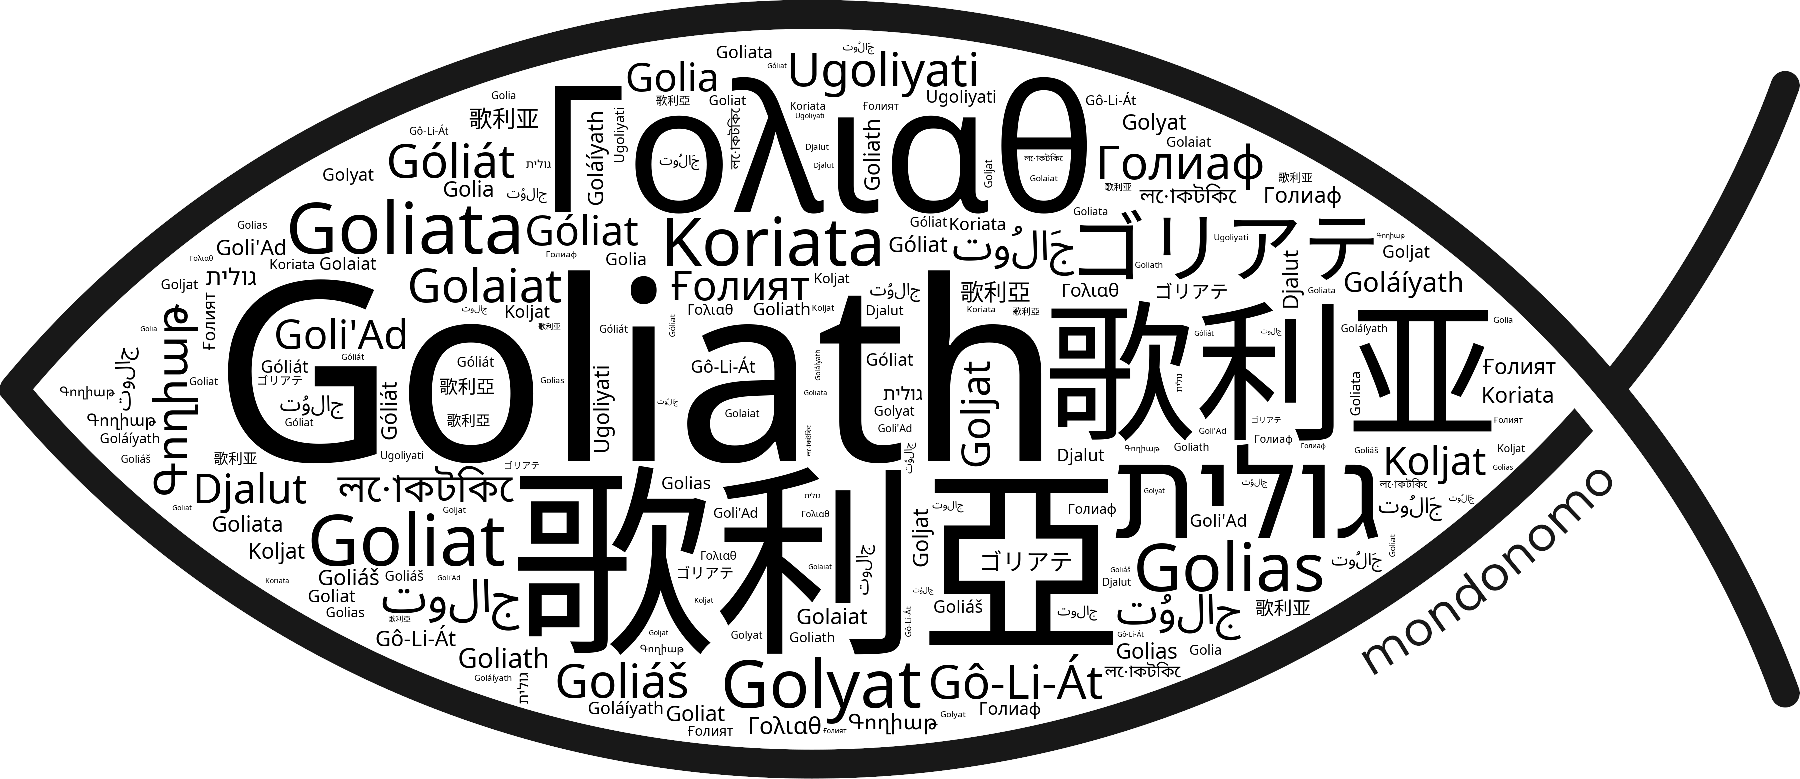 Name Goliath in the world's Bibles